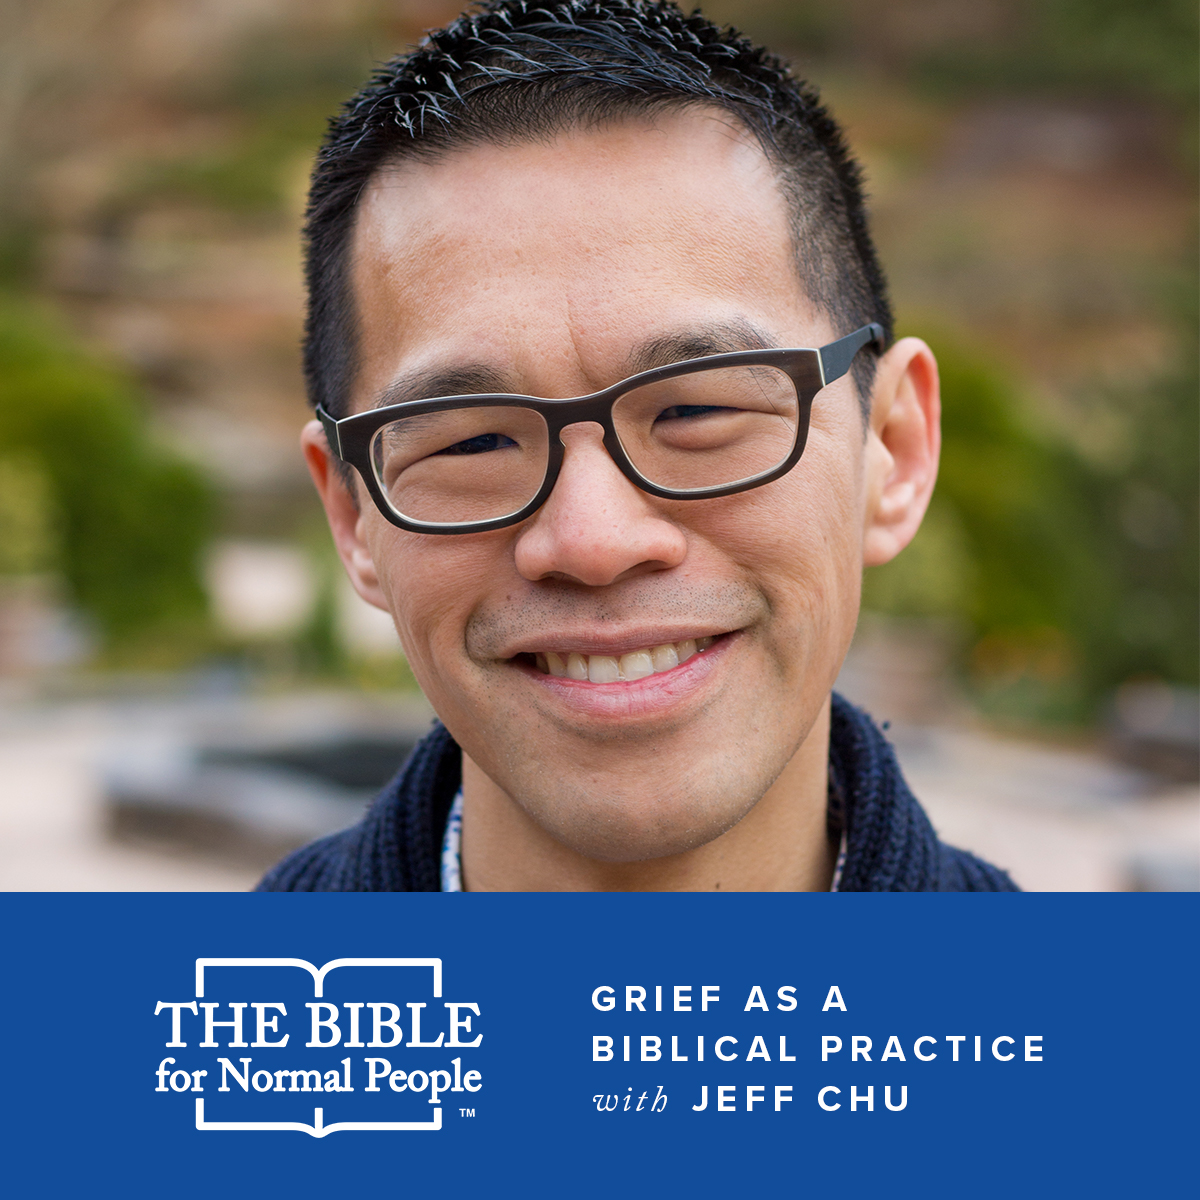 Interview with Jeff Chu: Grief as a Biblical Practice